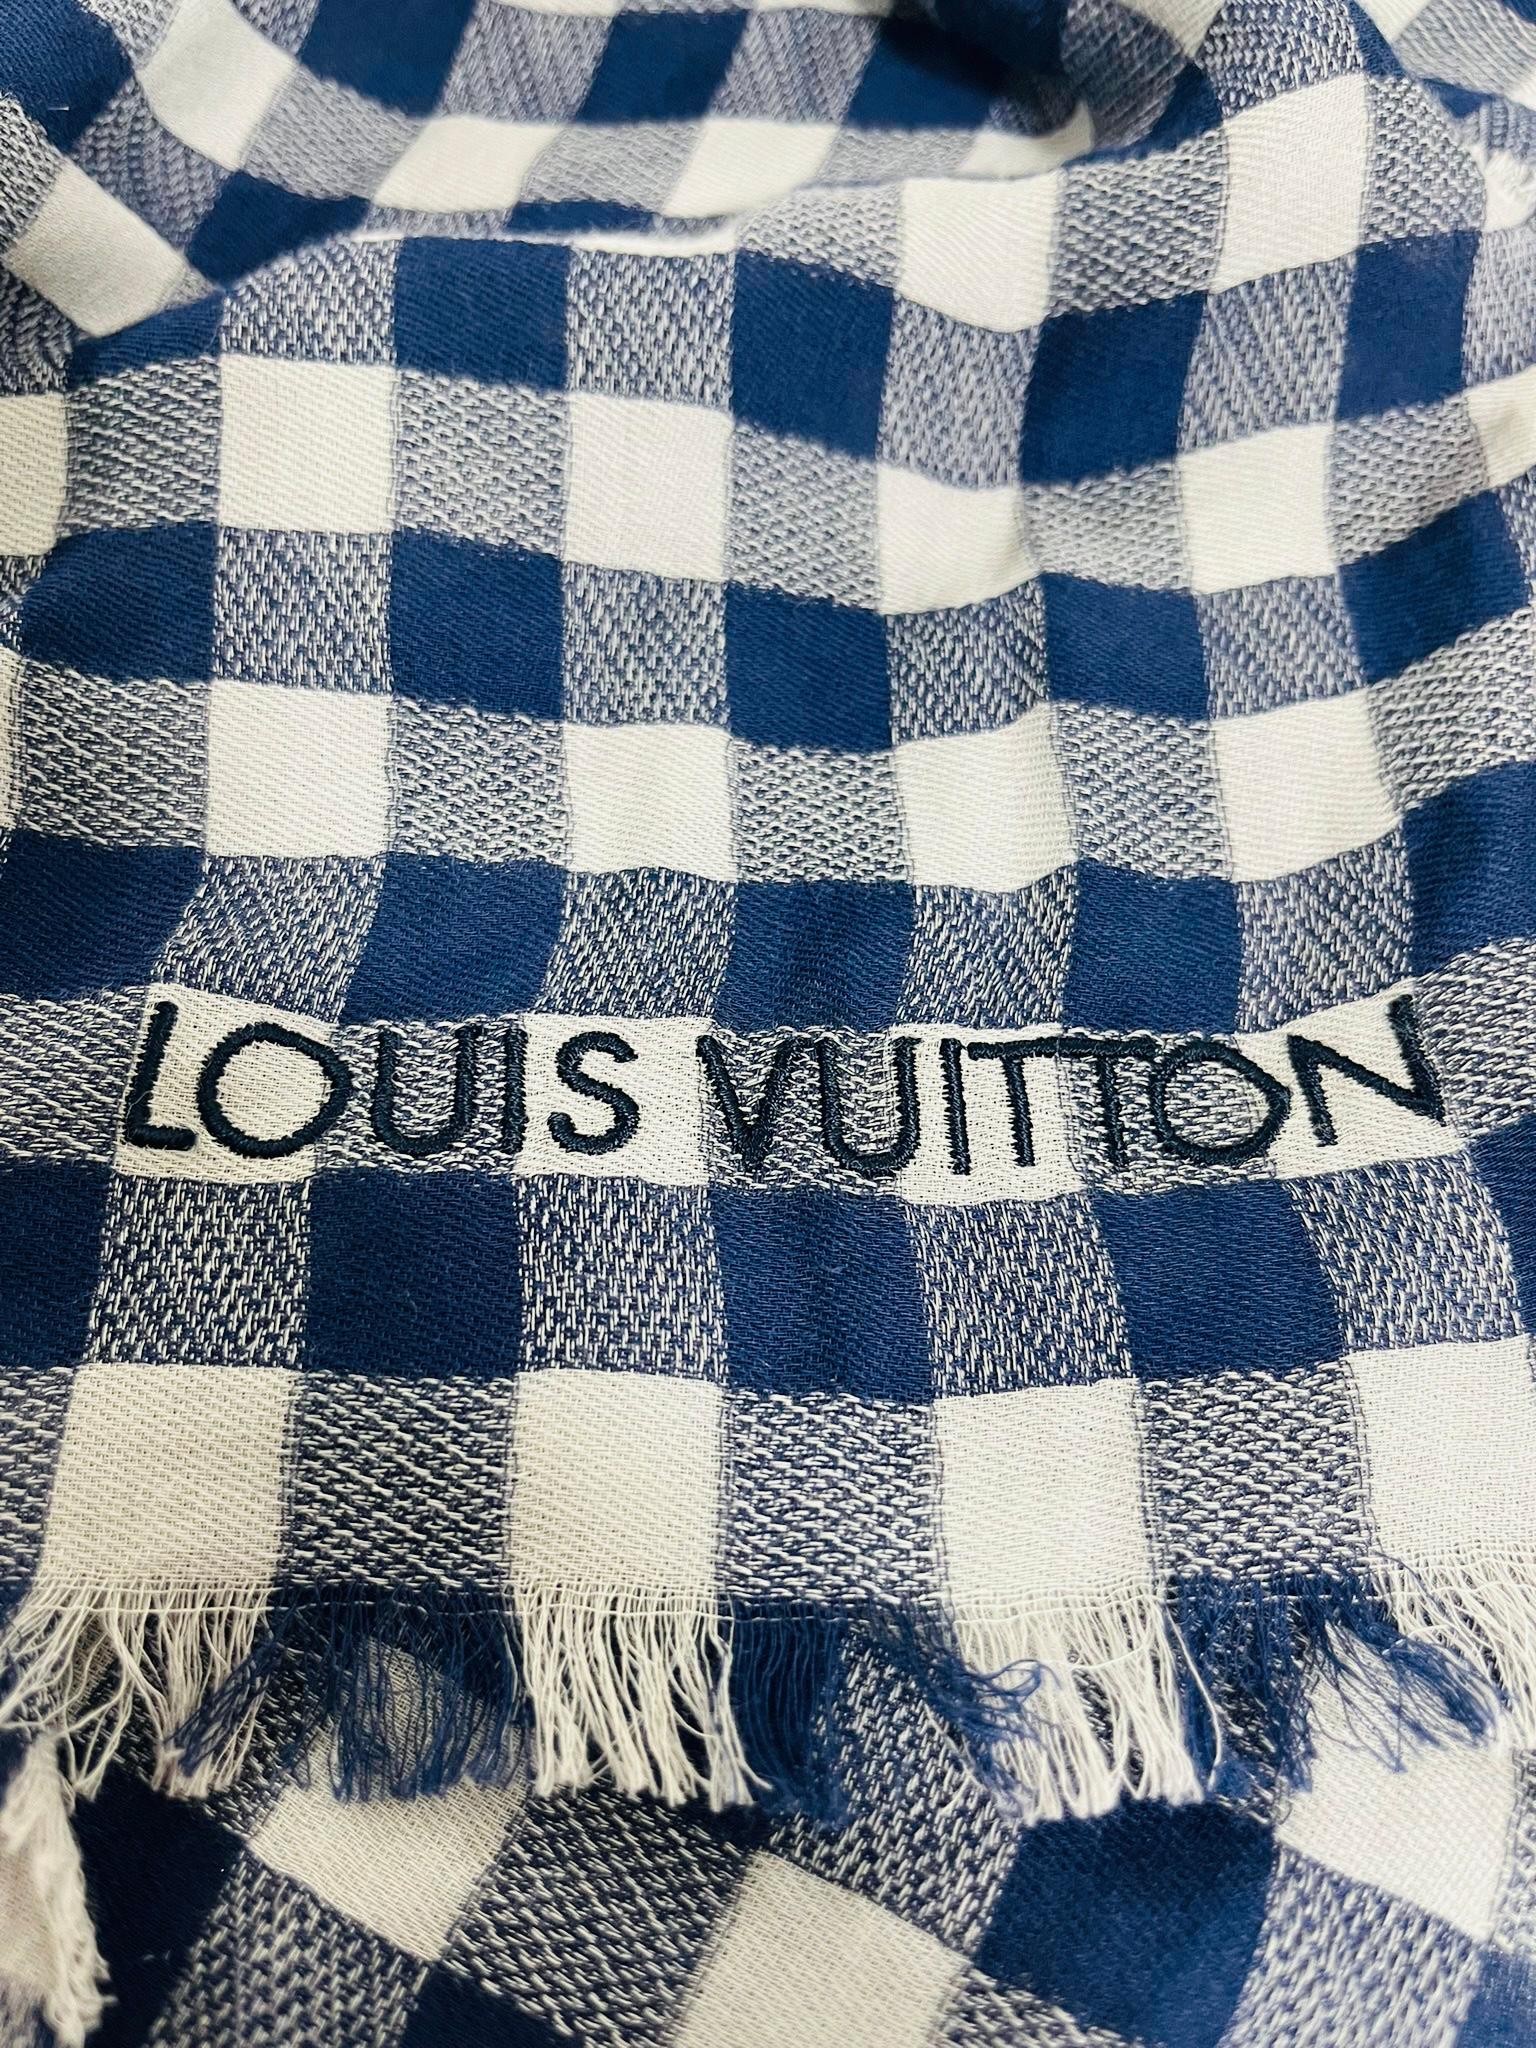 Louis Vuitton Cotton Gingham Shawl Scarf In Good Condition For Sale In London, GB